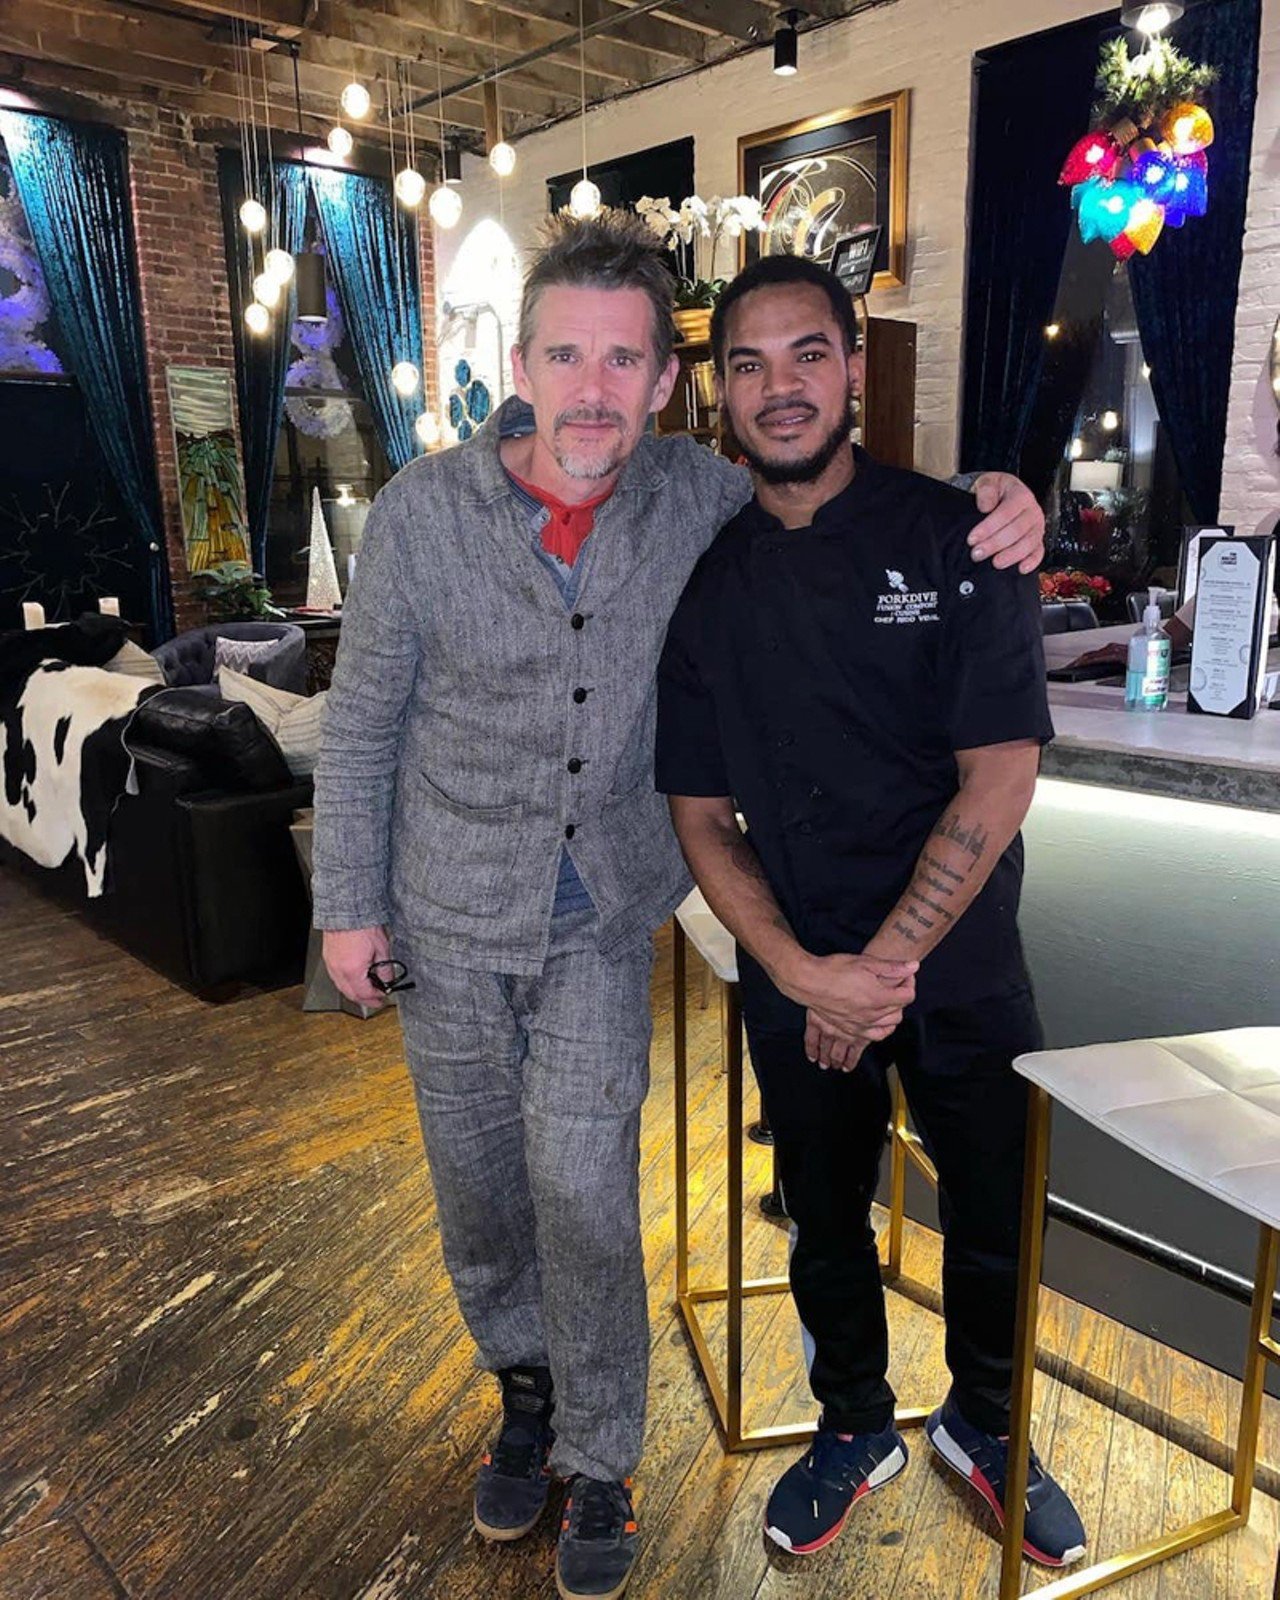  The Biscuit Lounge 
120 S. 10th St. 
Ethan Hawke with Chef Rico Vidal of The ForkDive Experience at the loft at The Biscuit Lounge.
Photo via Rico Vidal.